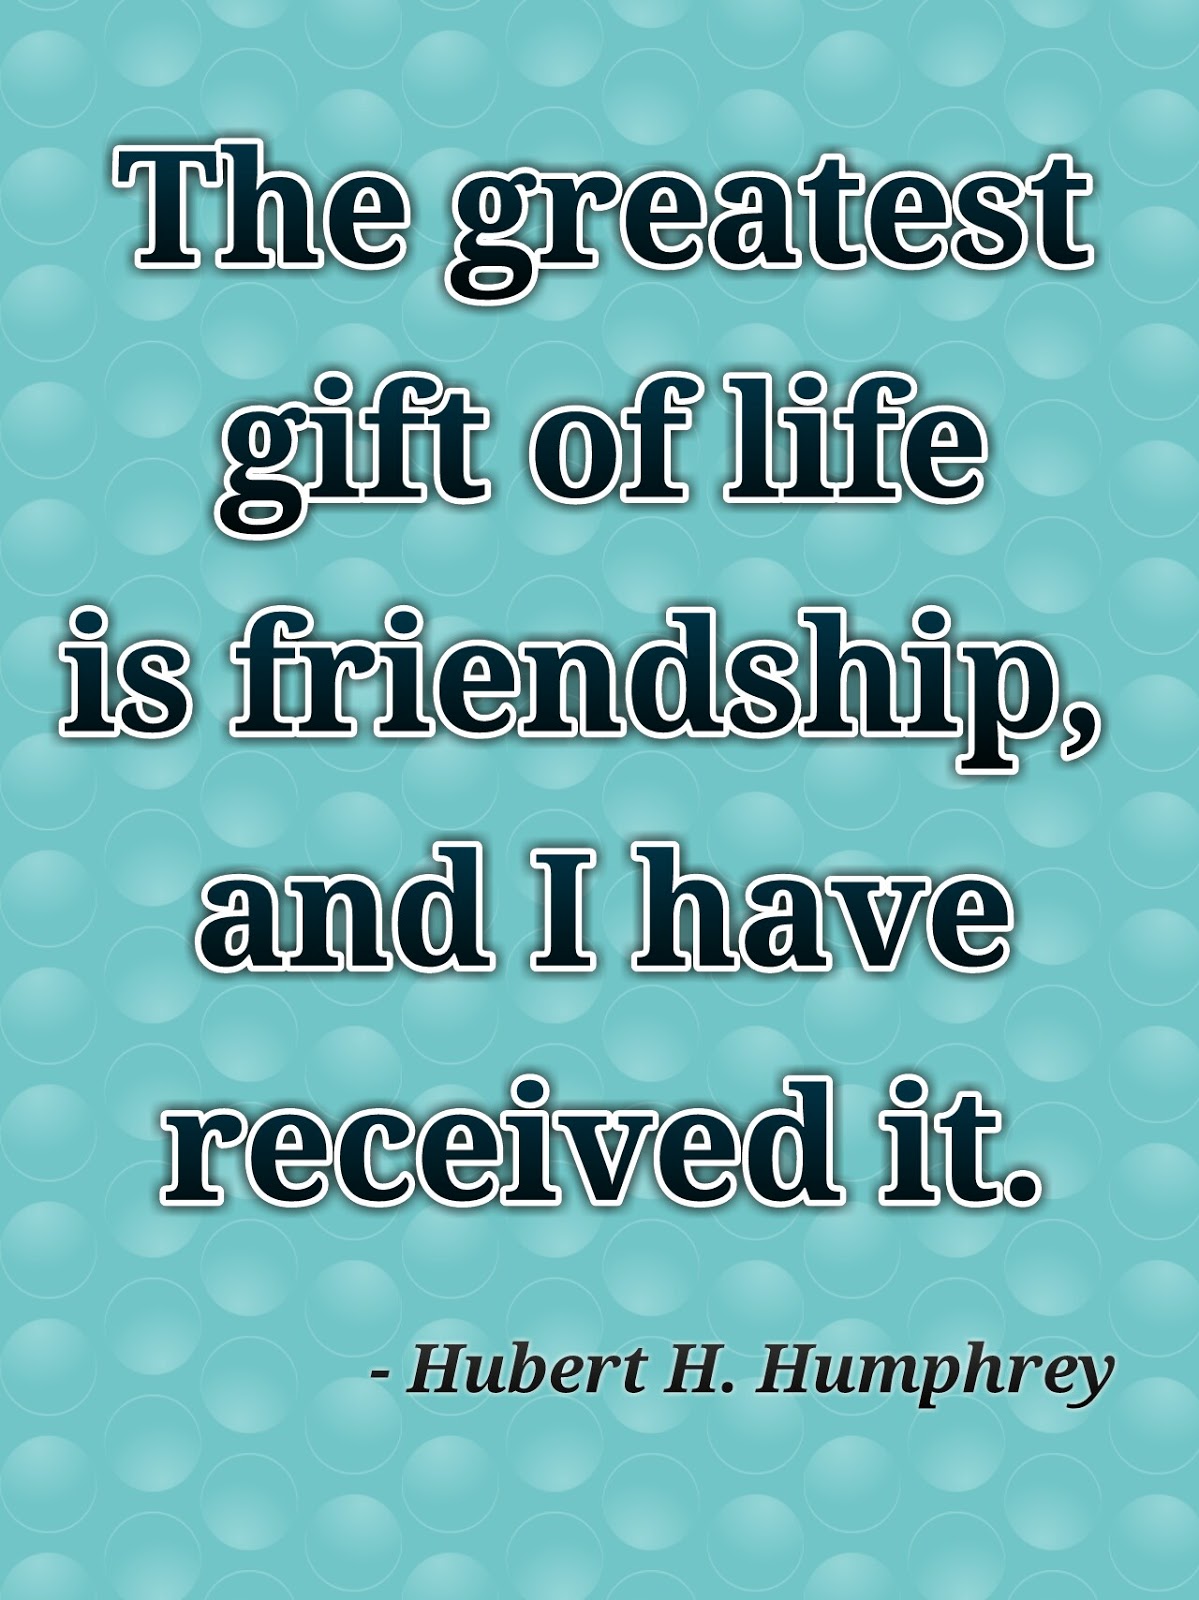 Friendship Quotes That Make Life Beautiful - Inspirational Quotes